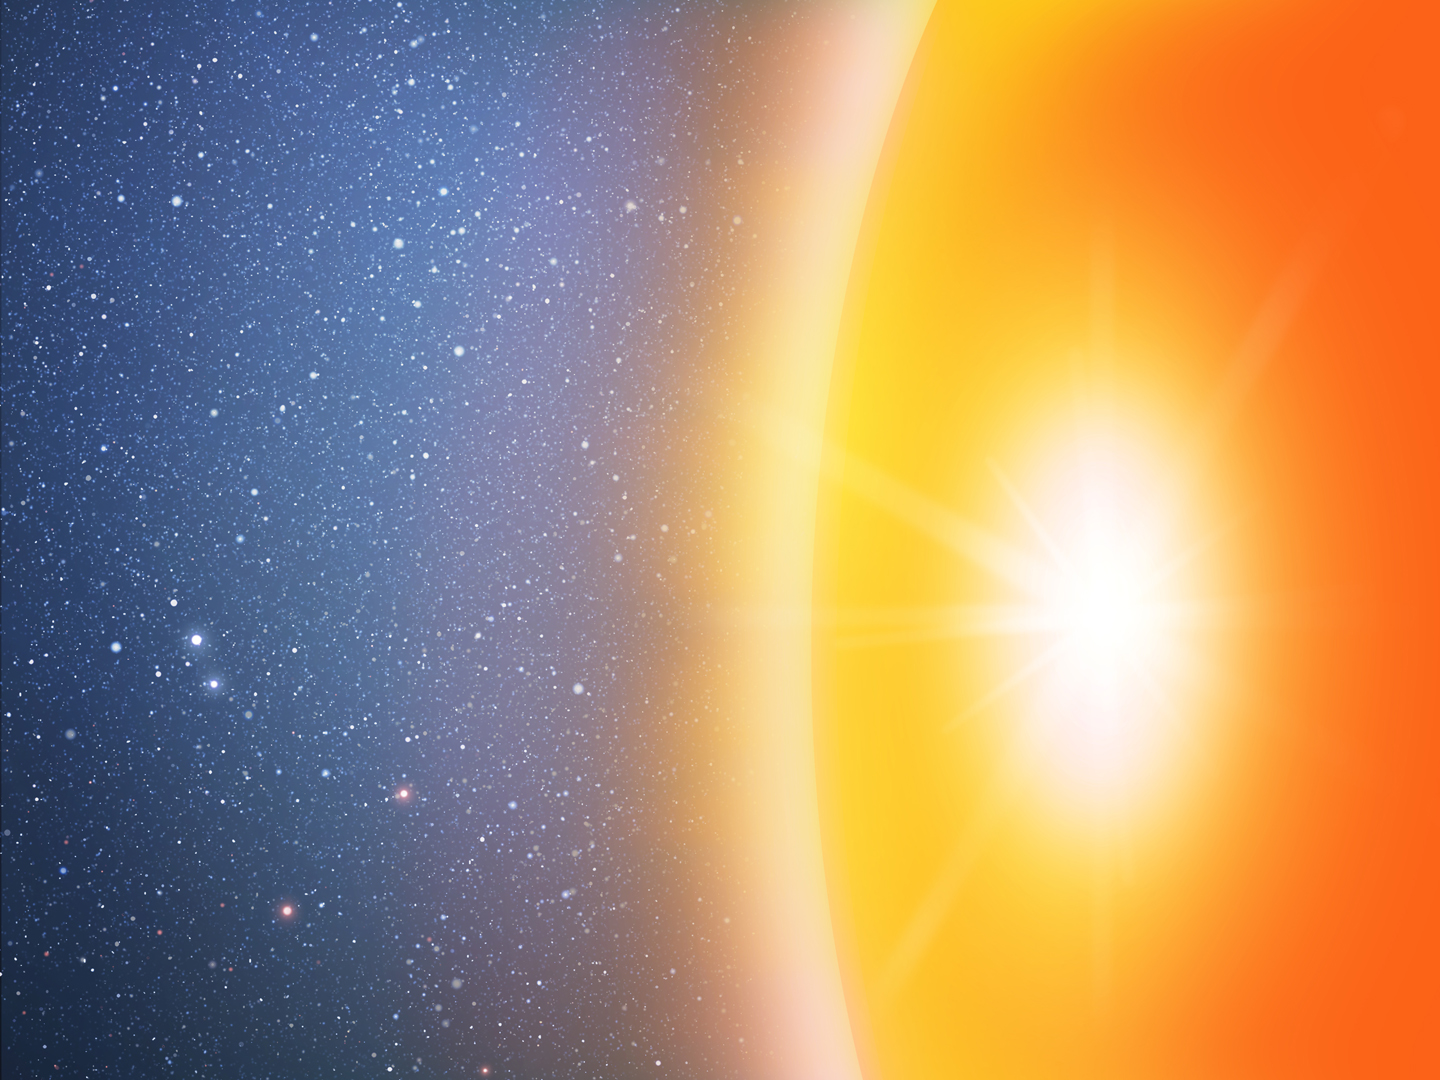 In this second artist&#039;s impression a huge sphere in the center of a galaxy is shown after a star has collided with it. Enormous amounts of heat and a dramatic increase in the brightness of the sphere are generated by this event. The lack of observation of such flares from the center of galaxies means that this hypothetical scenario is almost completely ruled out.